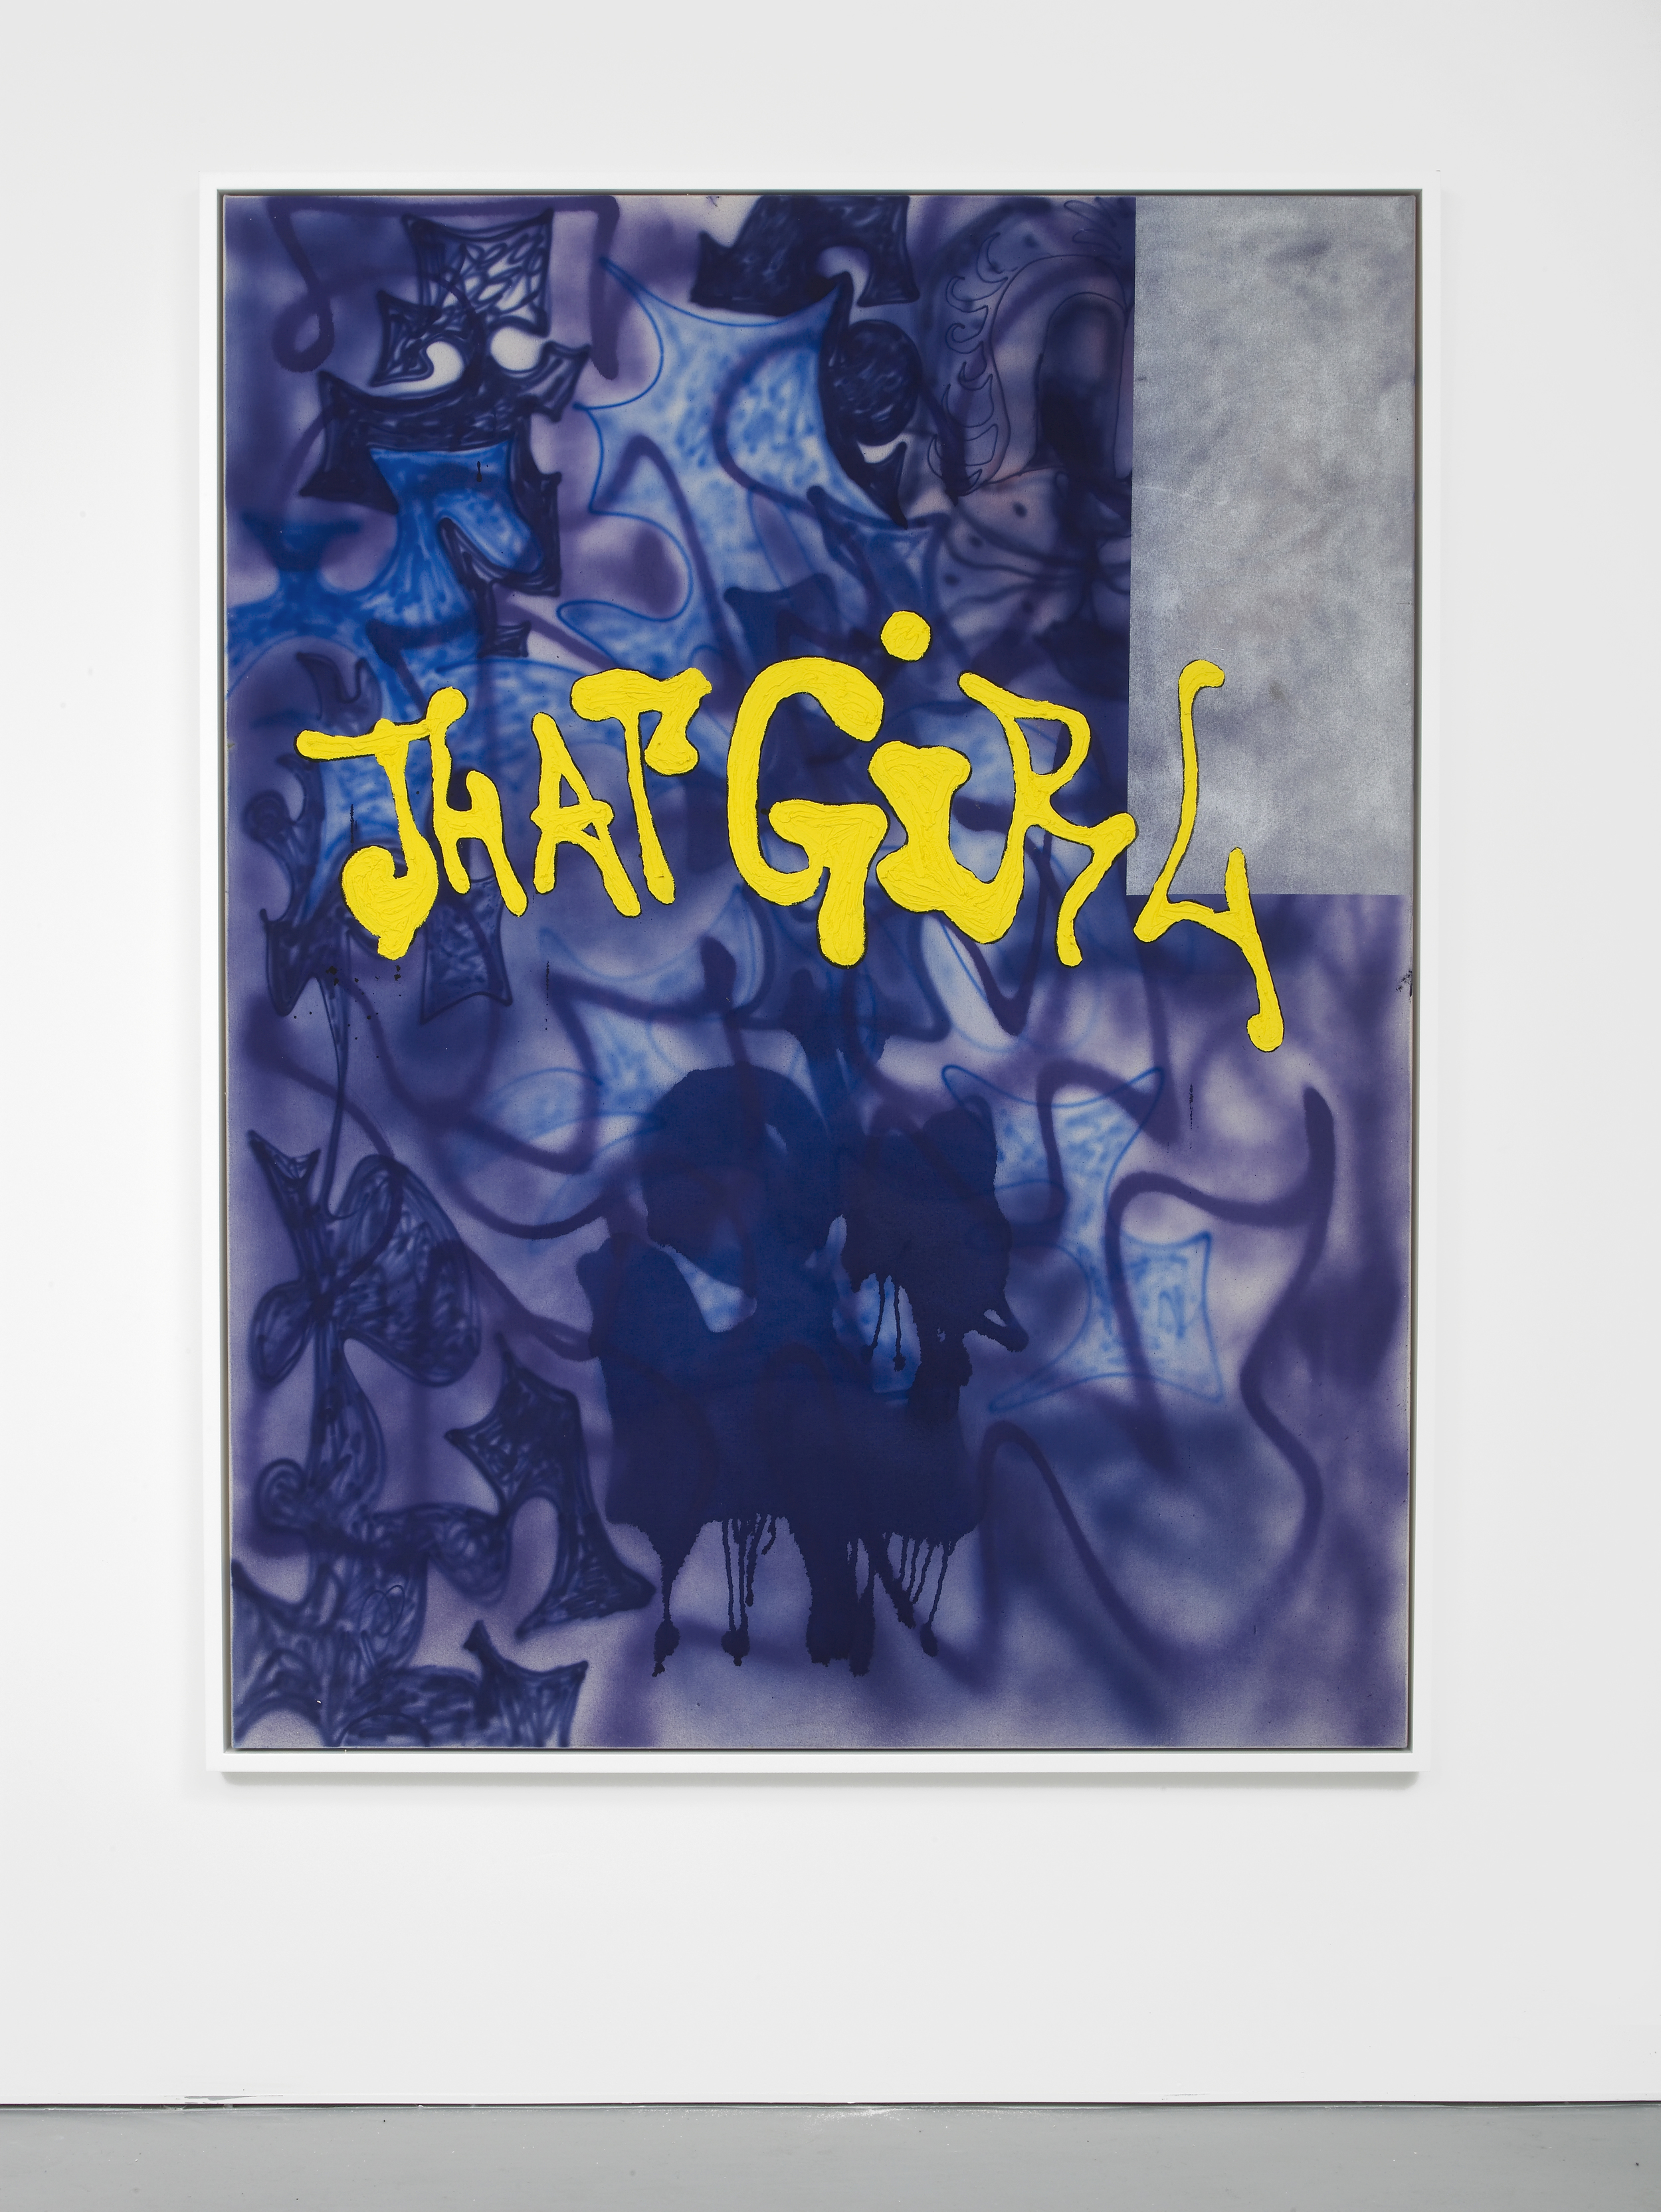     That Girl 2014 Spray paint, acrylics and Plastisol (PVC-paint) on glue primed linen canvas 170 x 130 cm / 66.9 x 51.1 in 